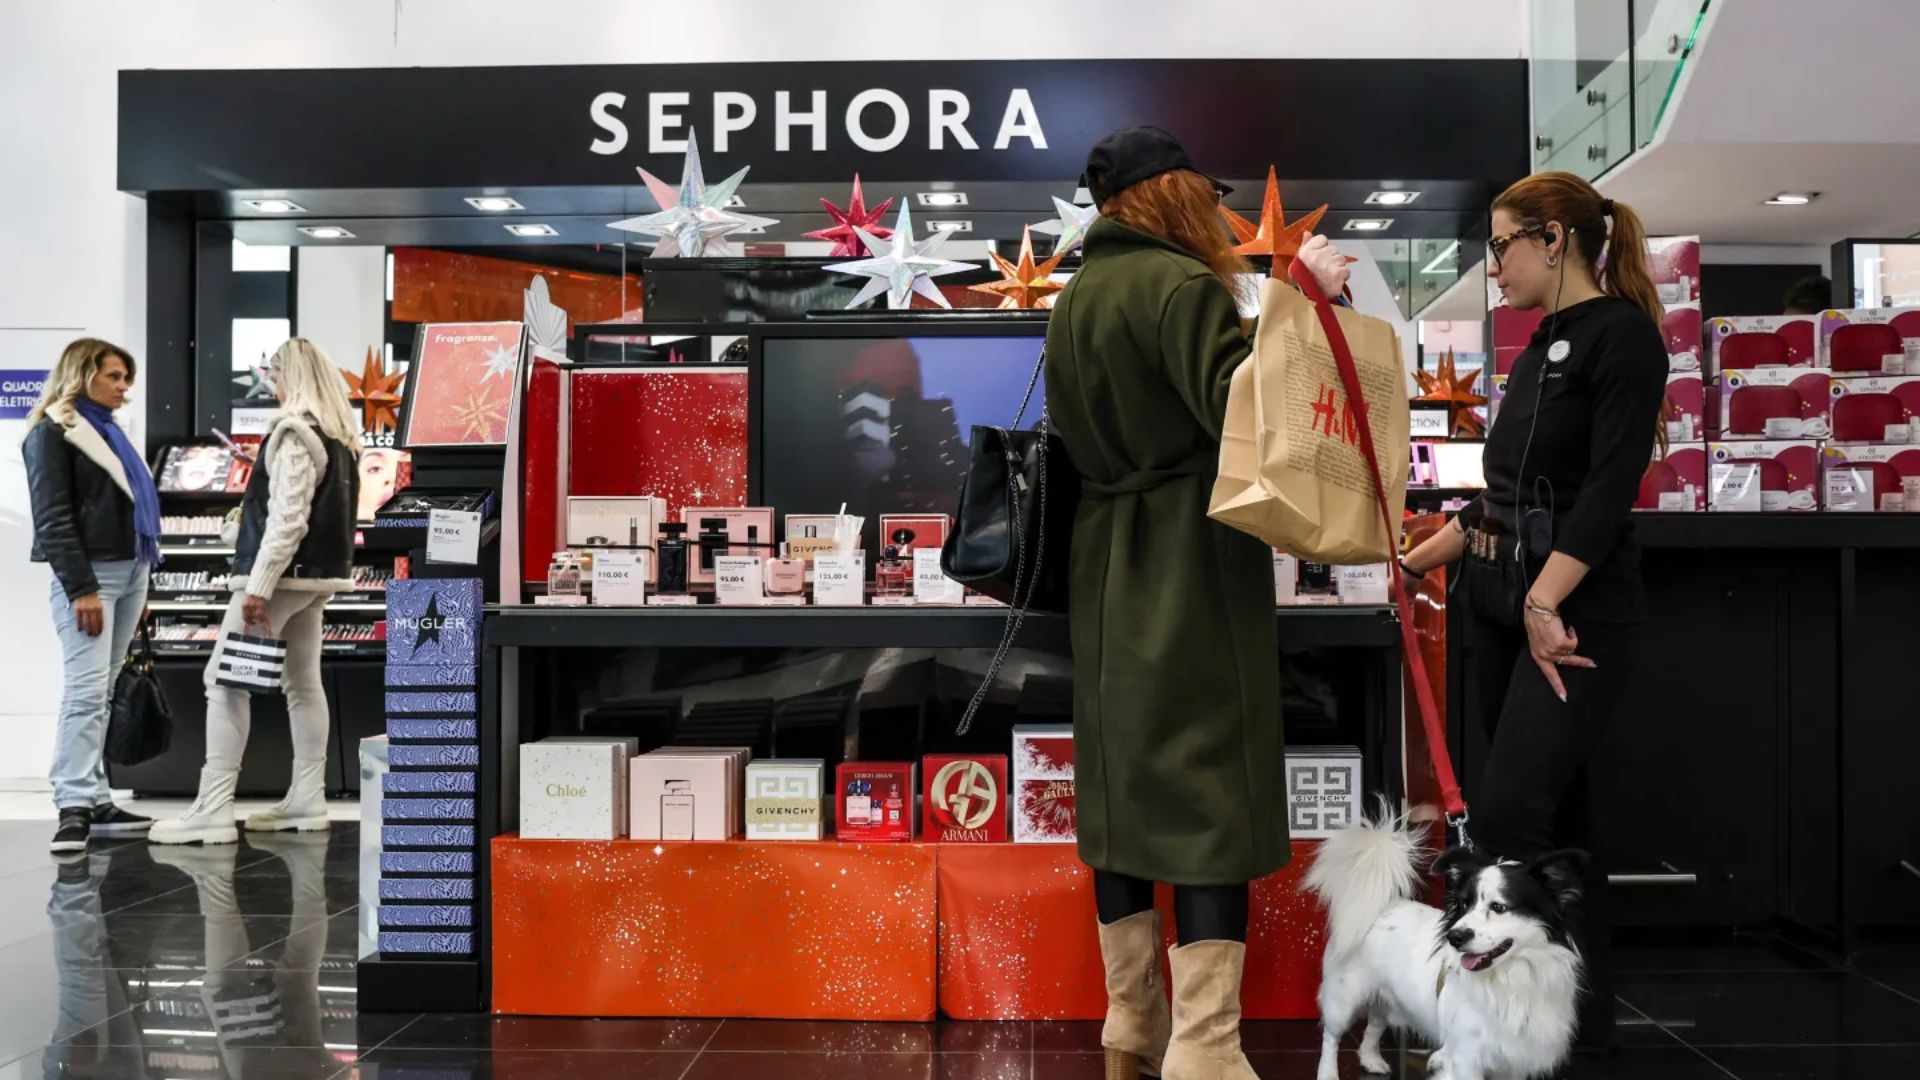 LVMH-owned Sephora is riding the ‘lipstick effect’ wave as it eyes more growth amid continuing economic downturn